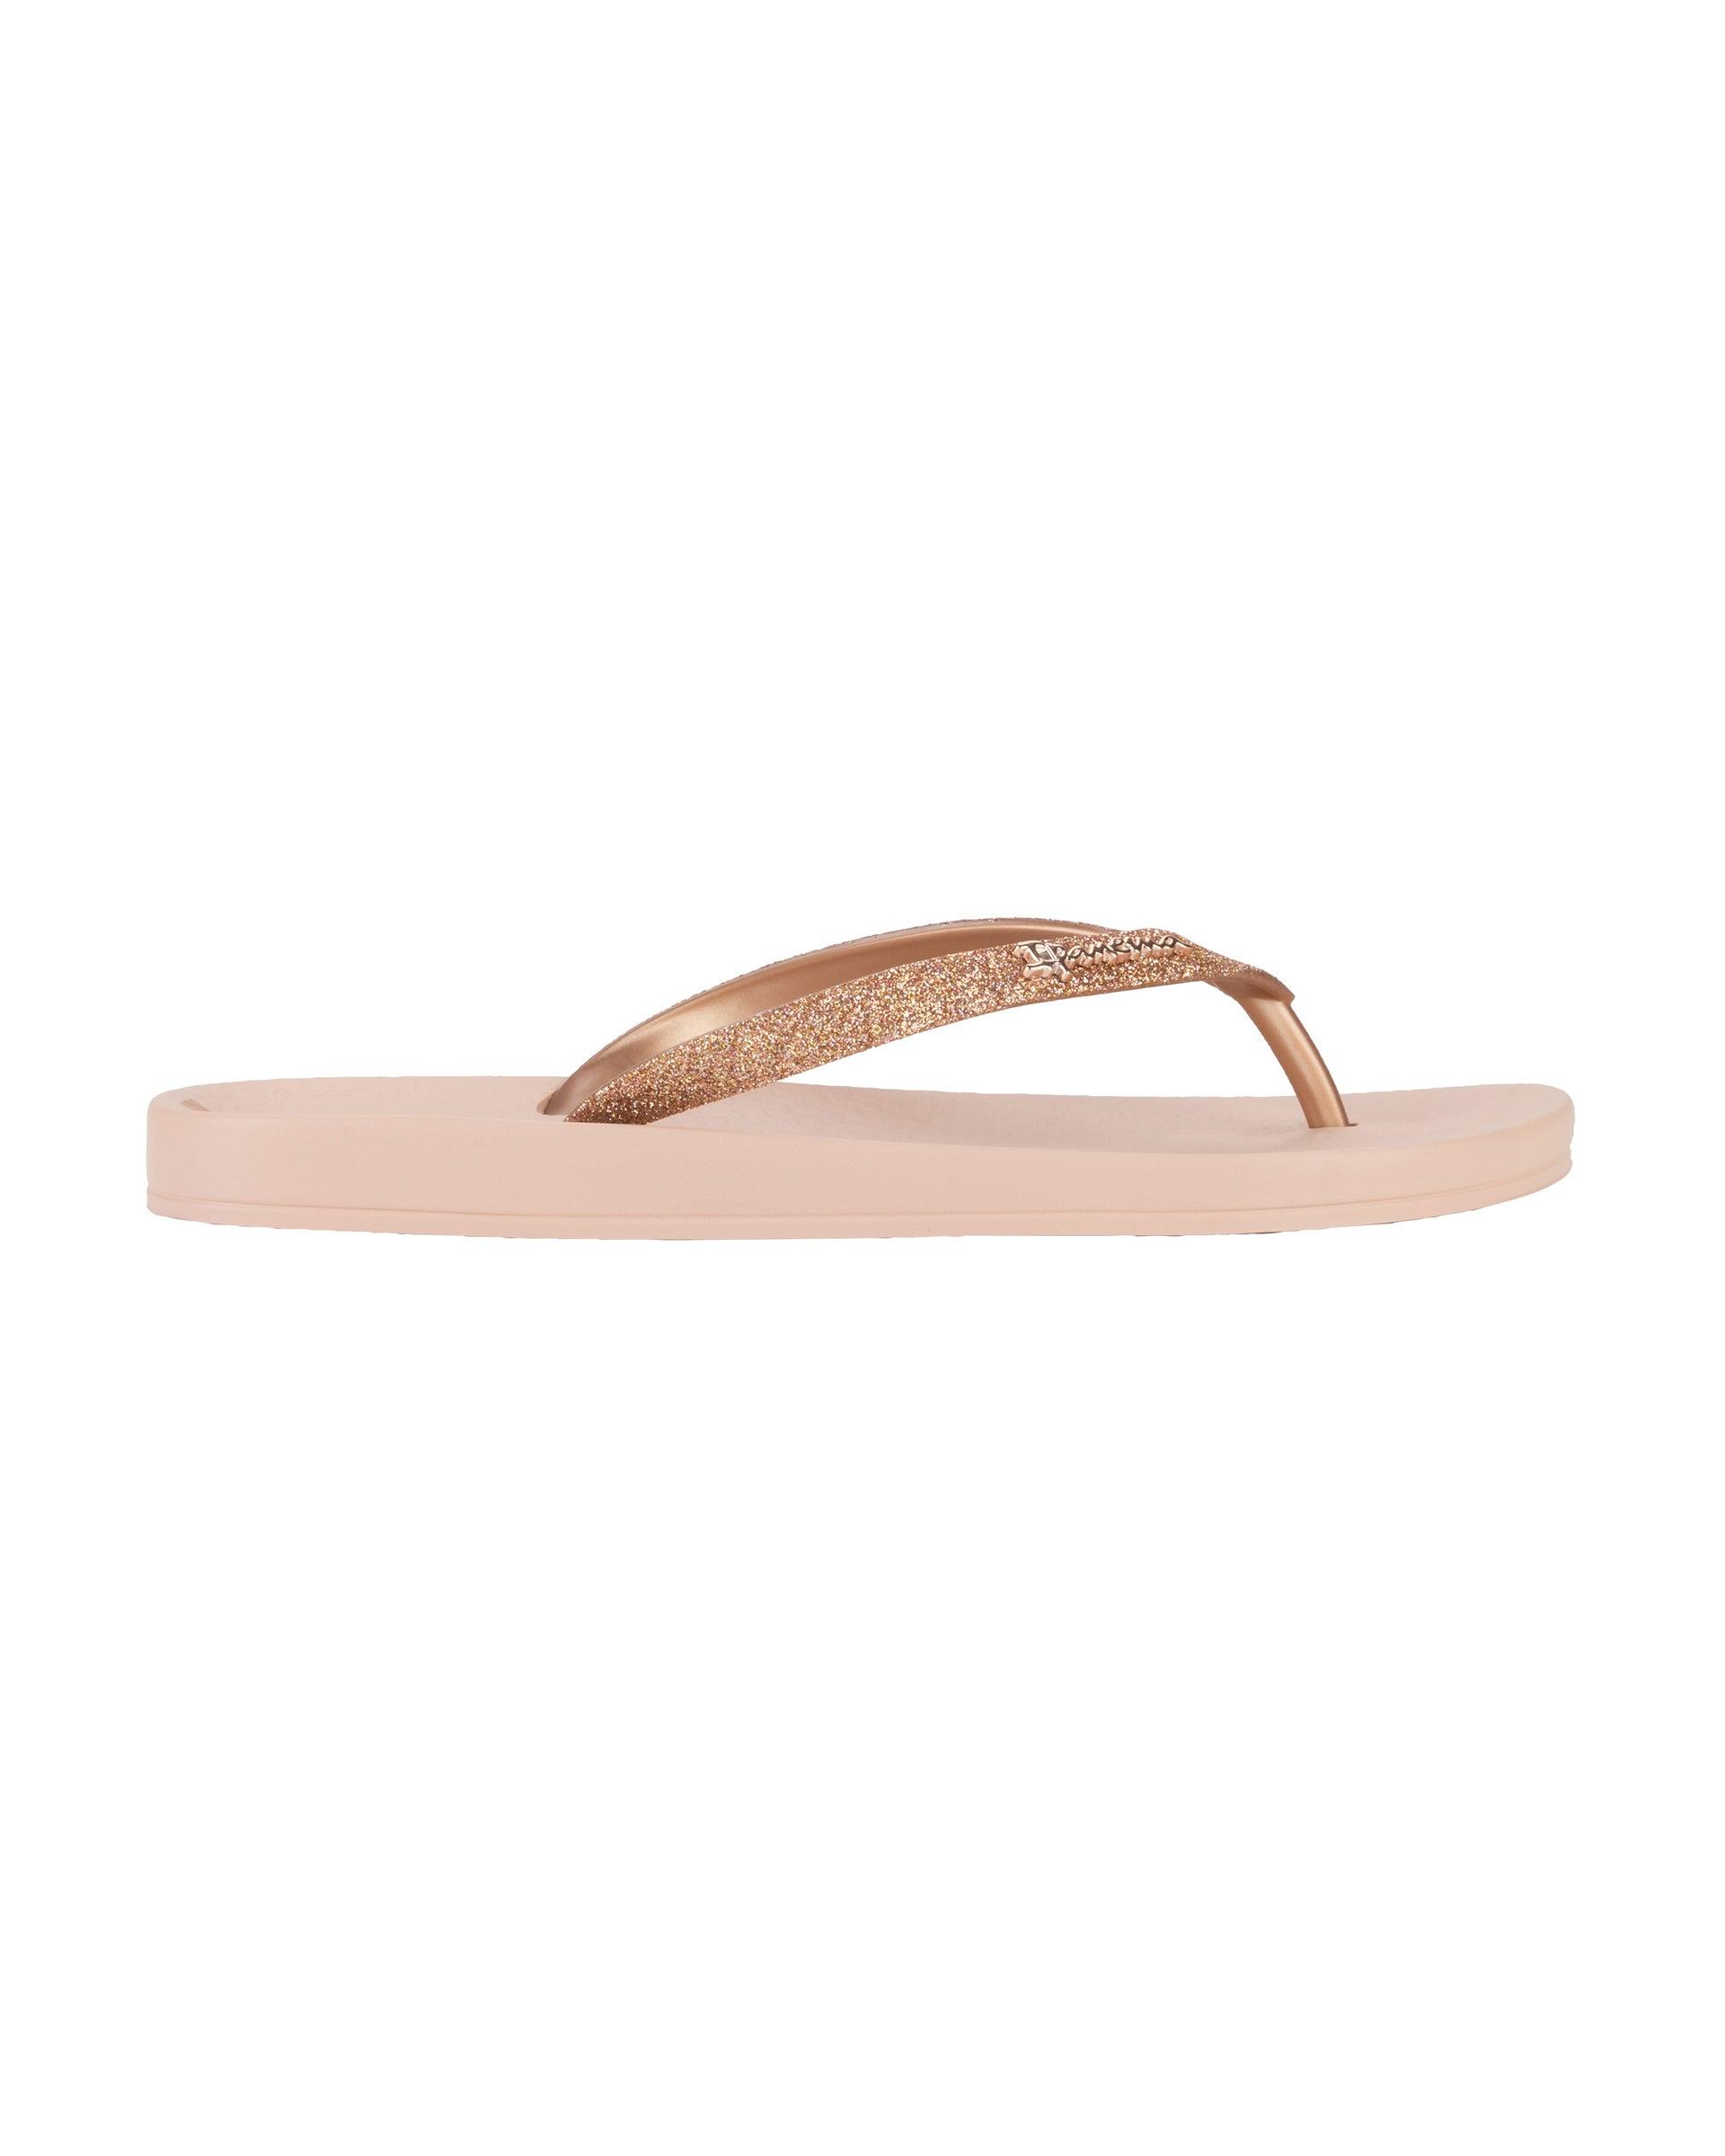 Outer side view of a pink Ipanema Ana Sparkle women's flip flop with glitter rose gold straps.